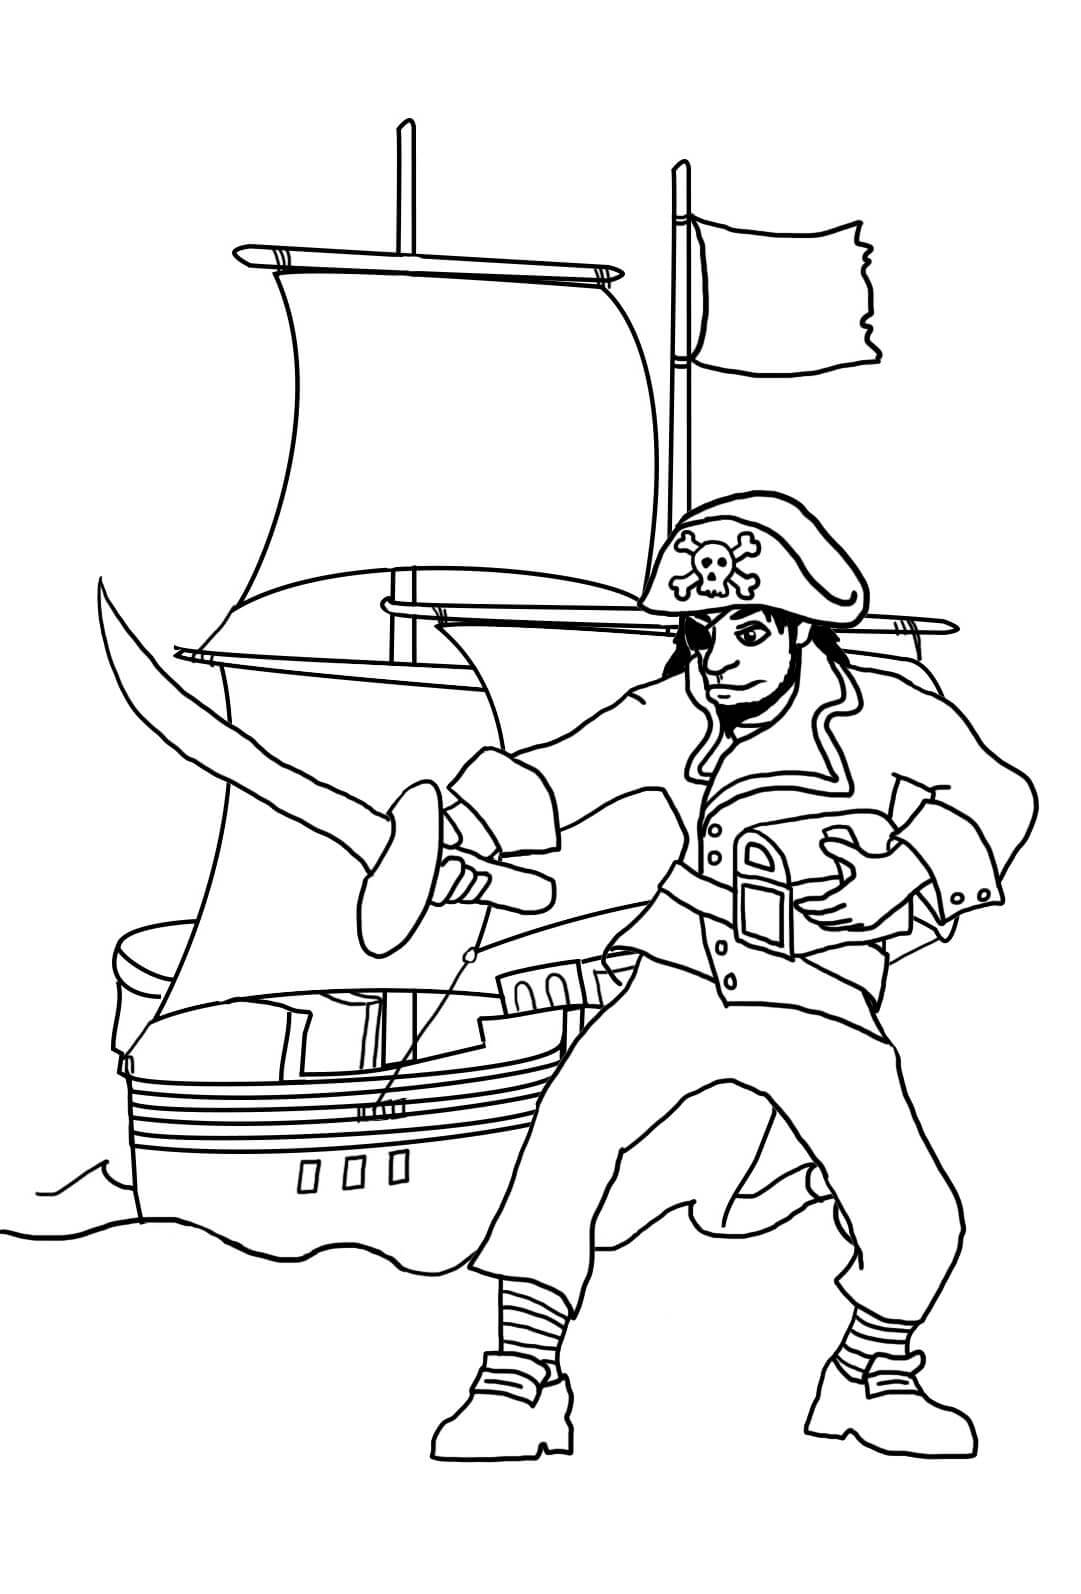 Coloriage Pirate With Sword and Pirate Ship